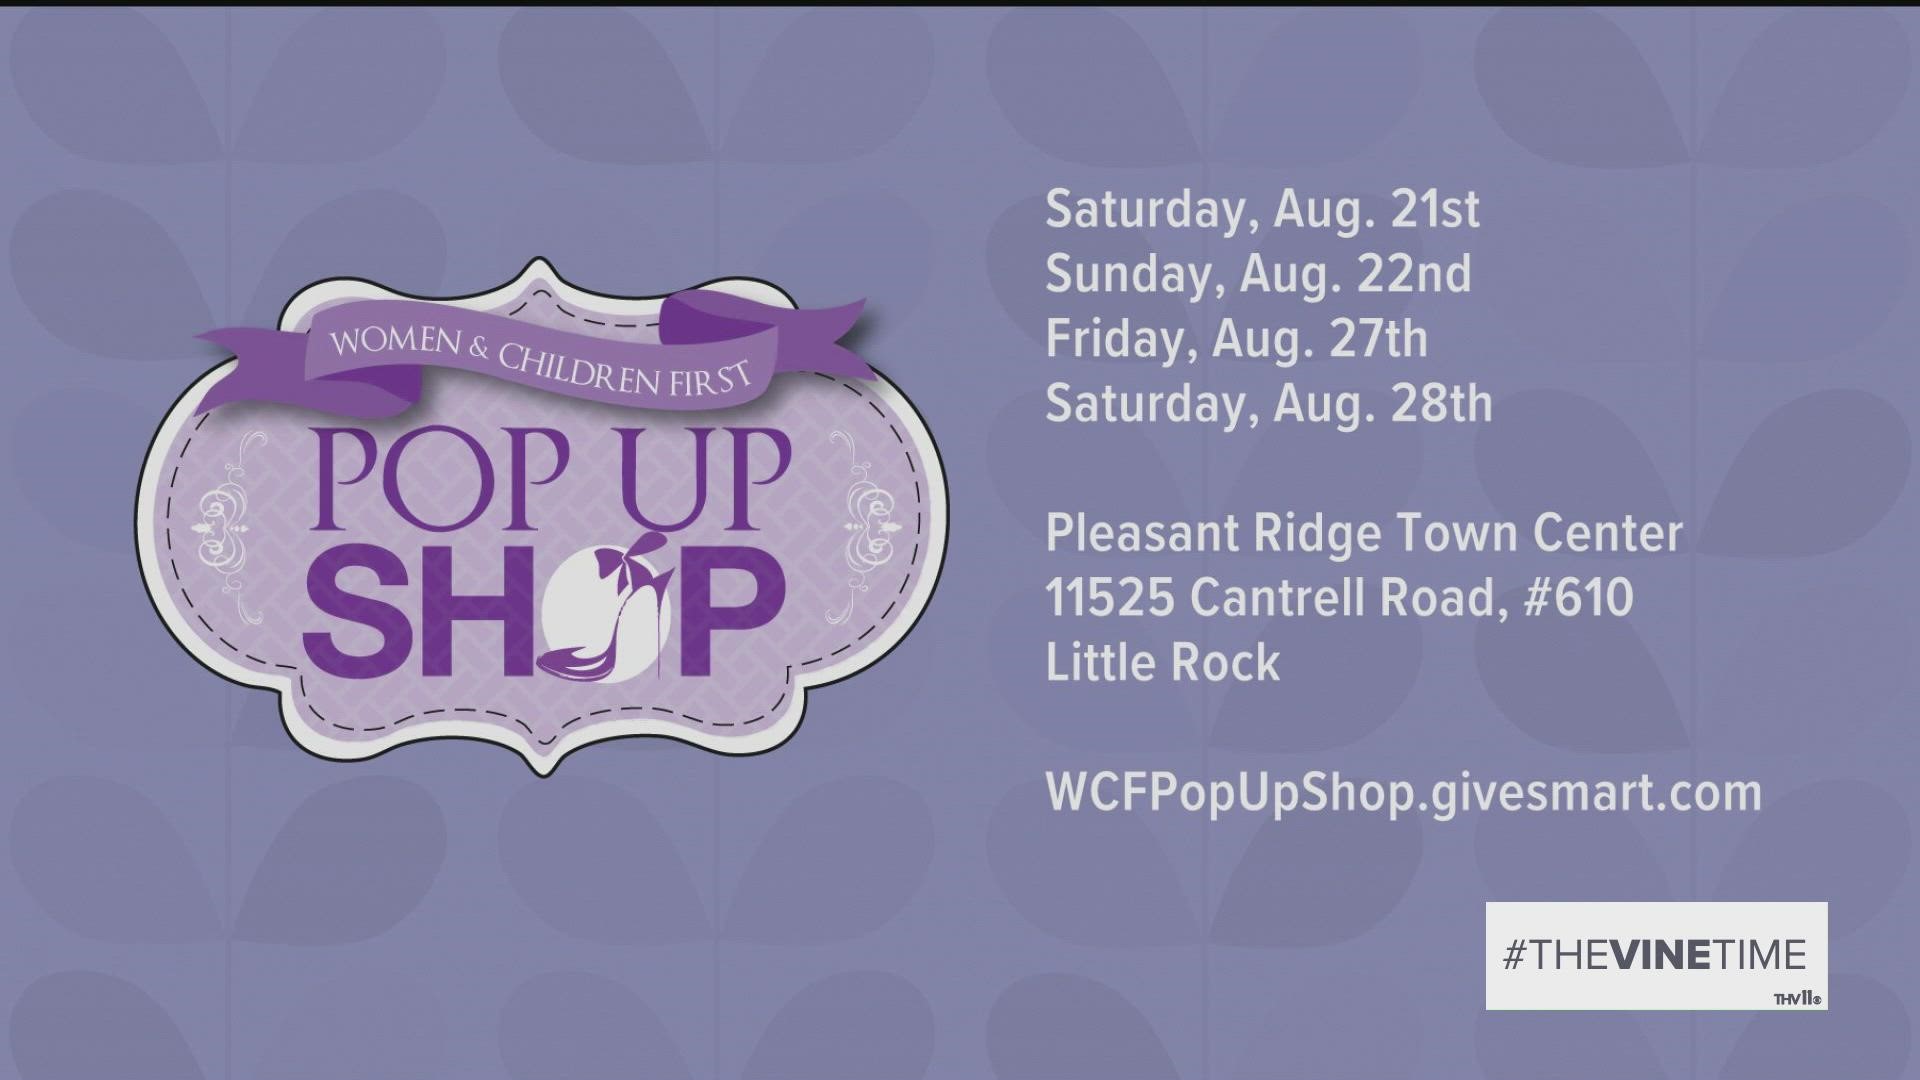 Get a jump start on your holiday shopping this weekend and next — with the "Women and Children's First" Pop Up shop.